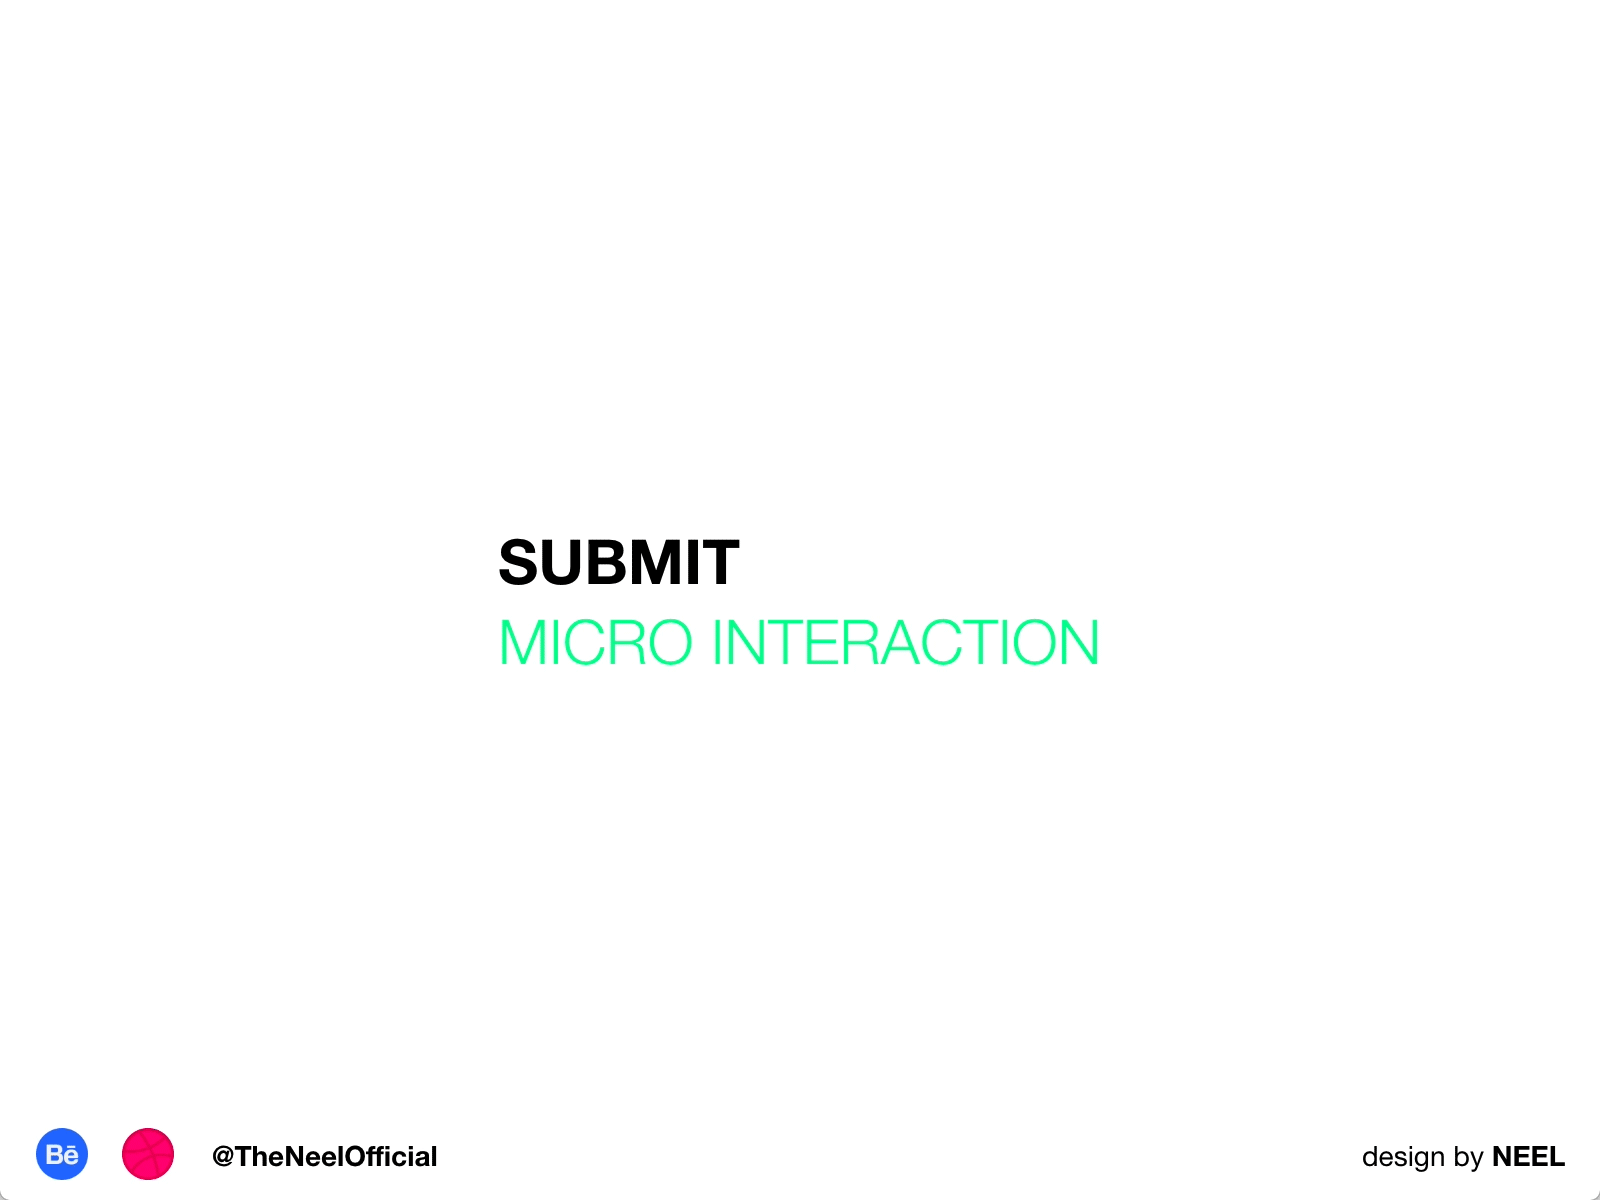 Submit Micro Interaction adobexd animation app button animation button design dailyui design green microinteraction microinteractions product design submission submit success ui challenge ui design user experience ux user interface design uxd uxdesign